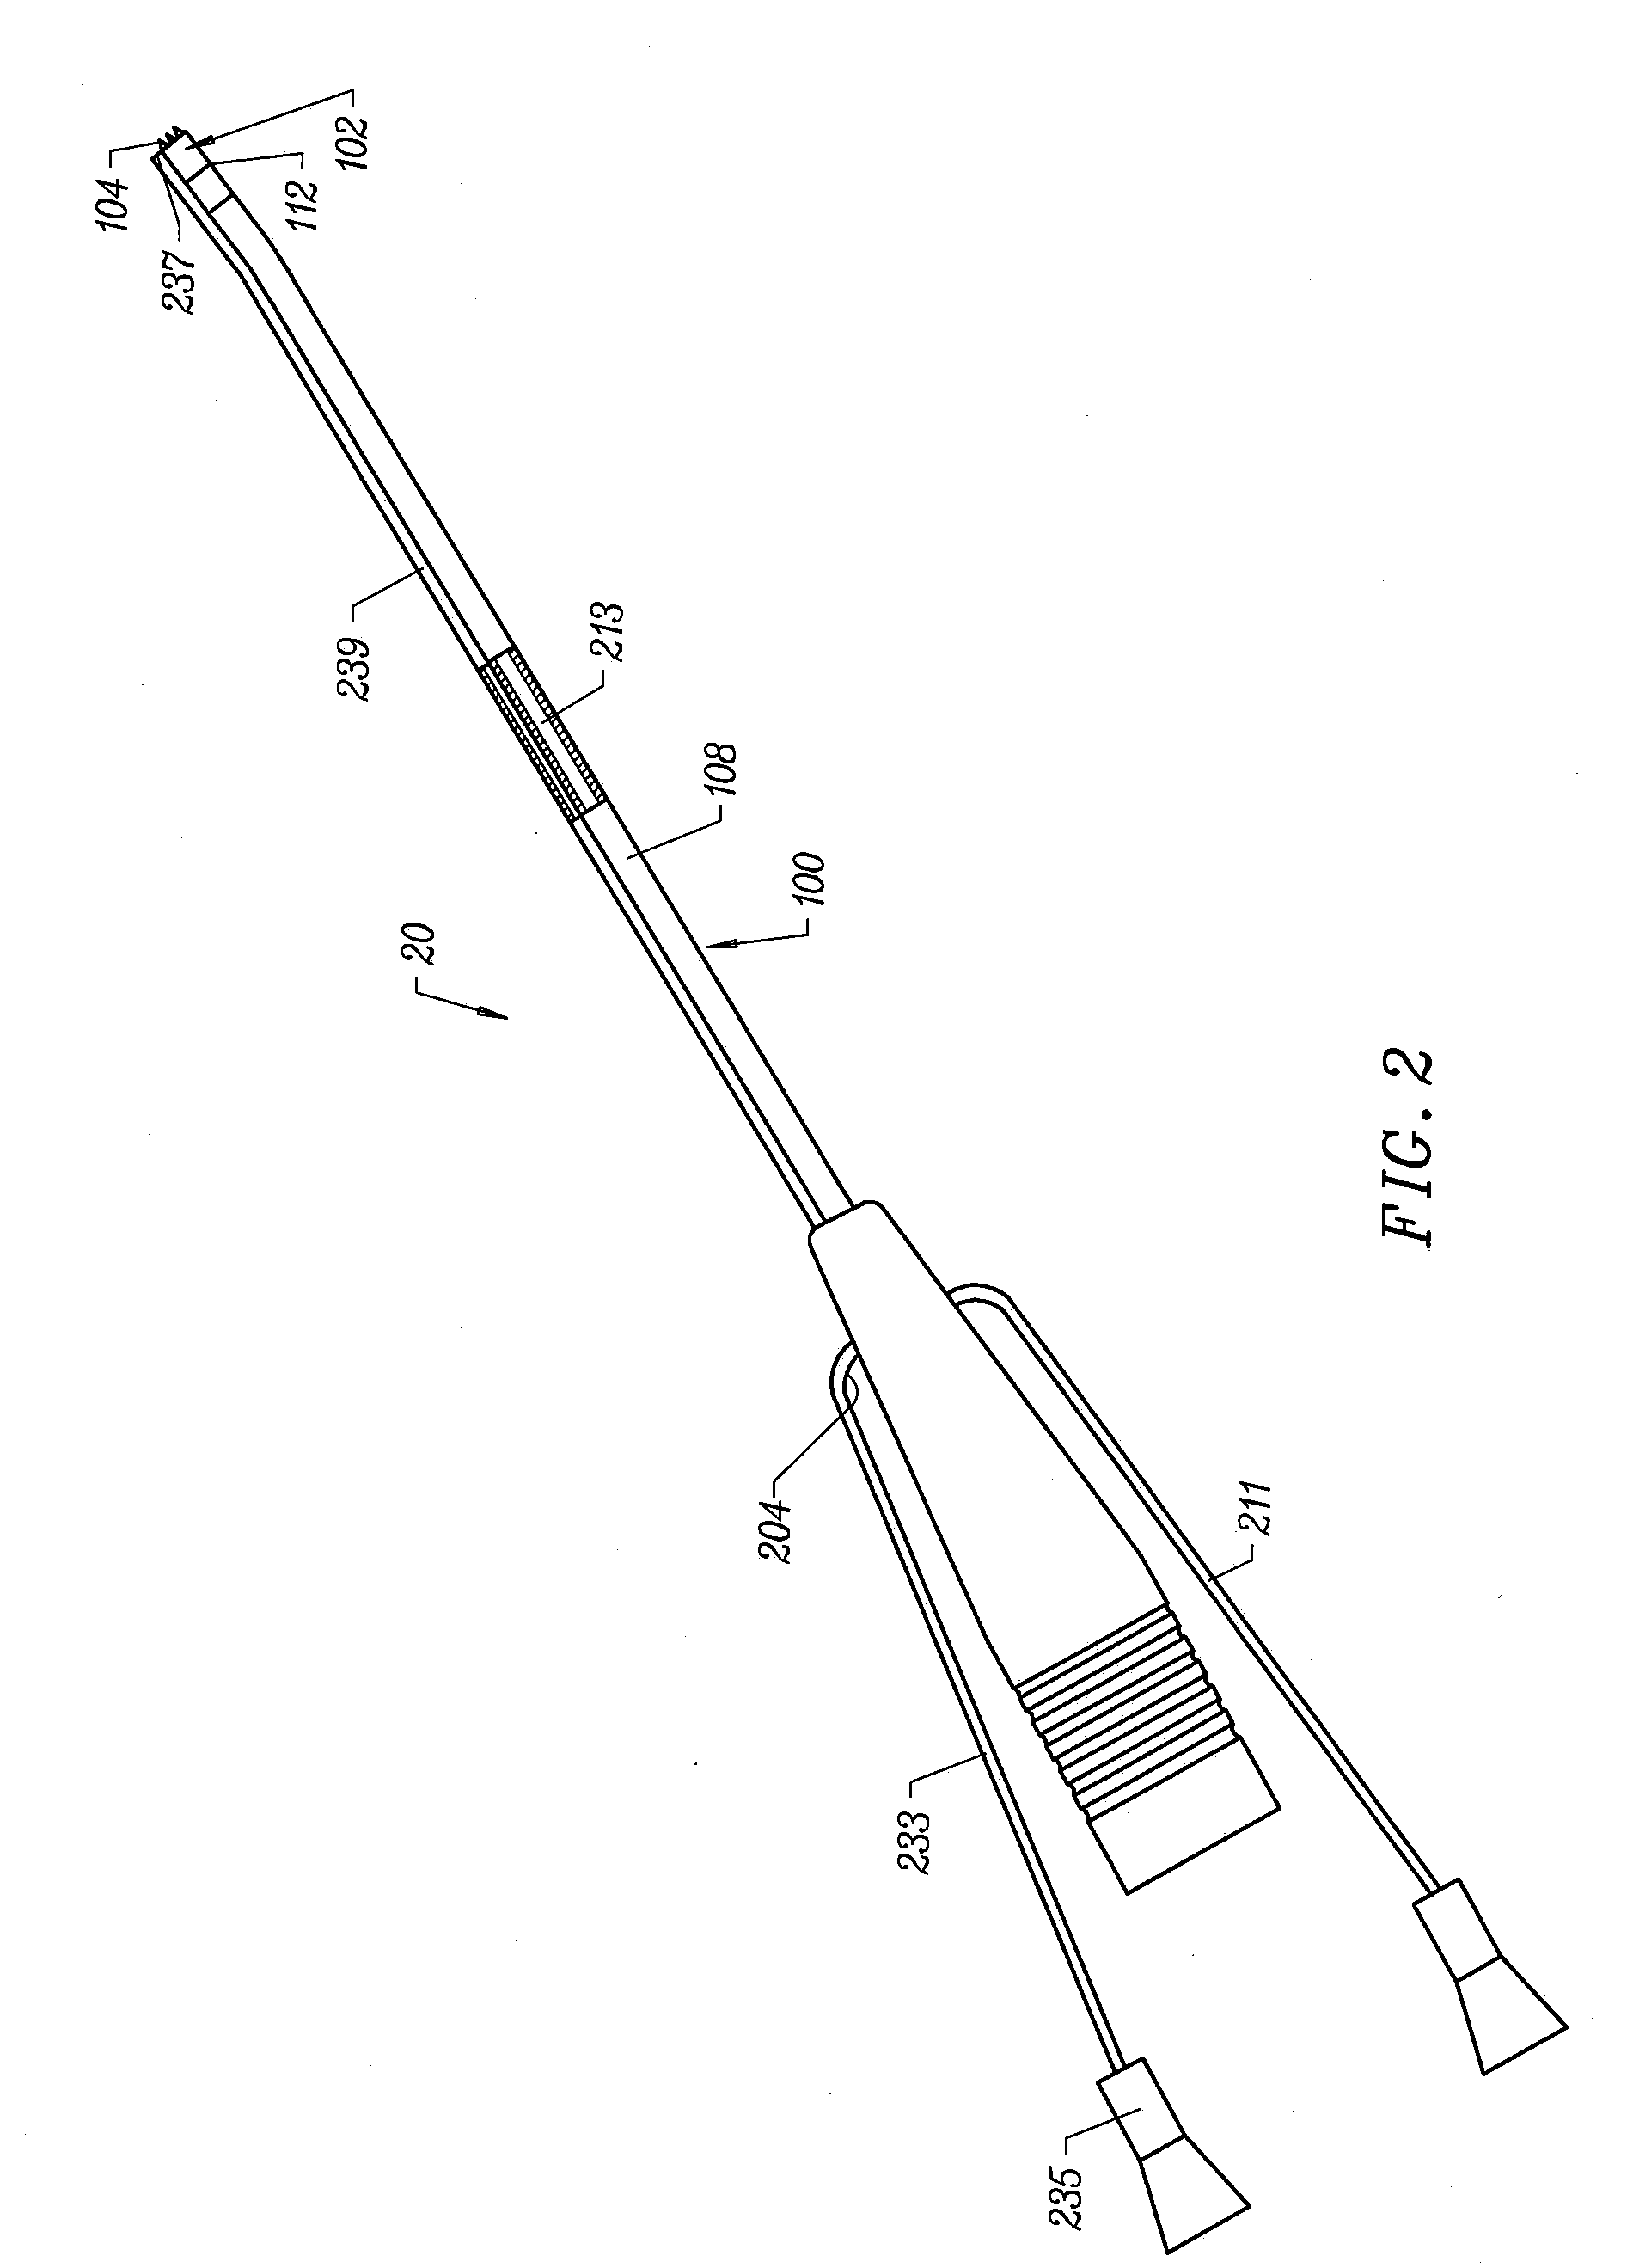 Systems and methods for electrosurgical spine surgery